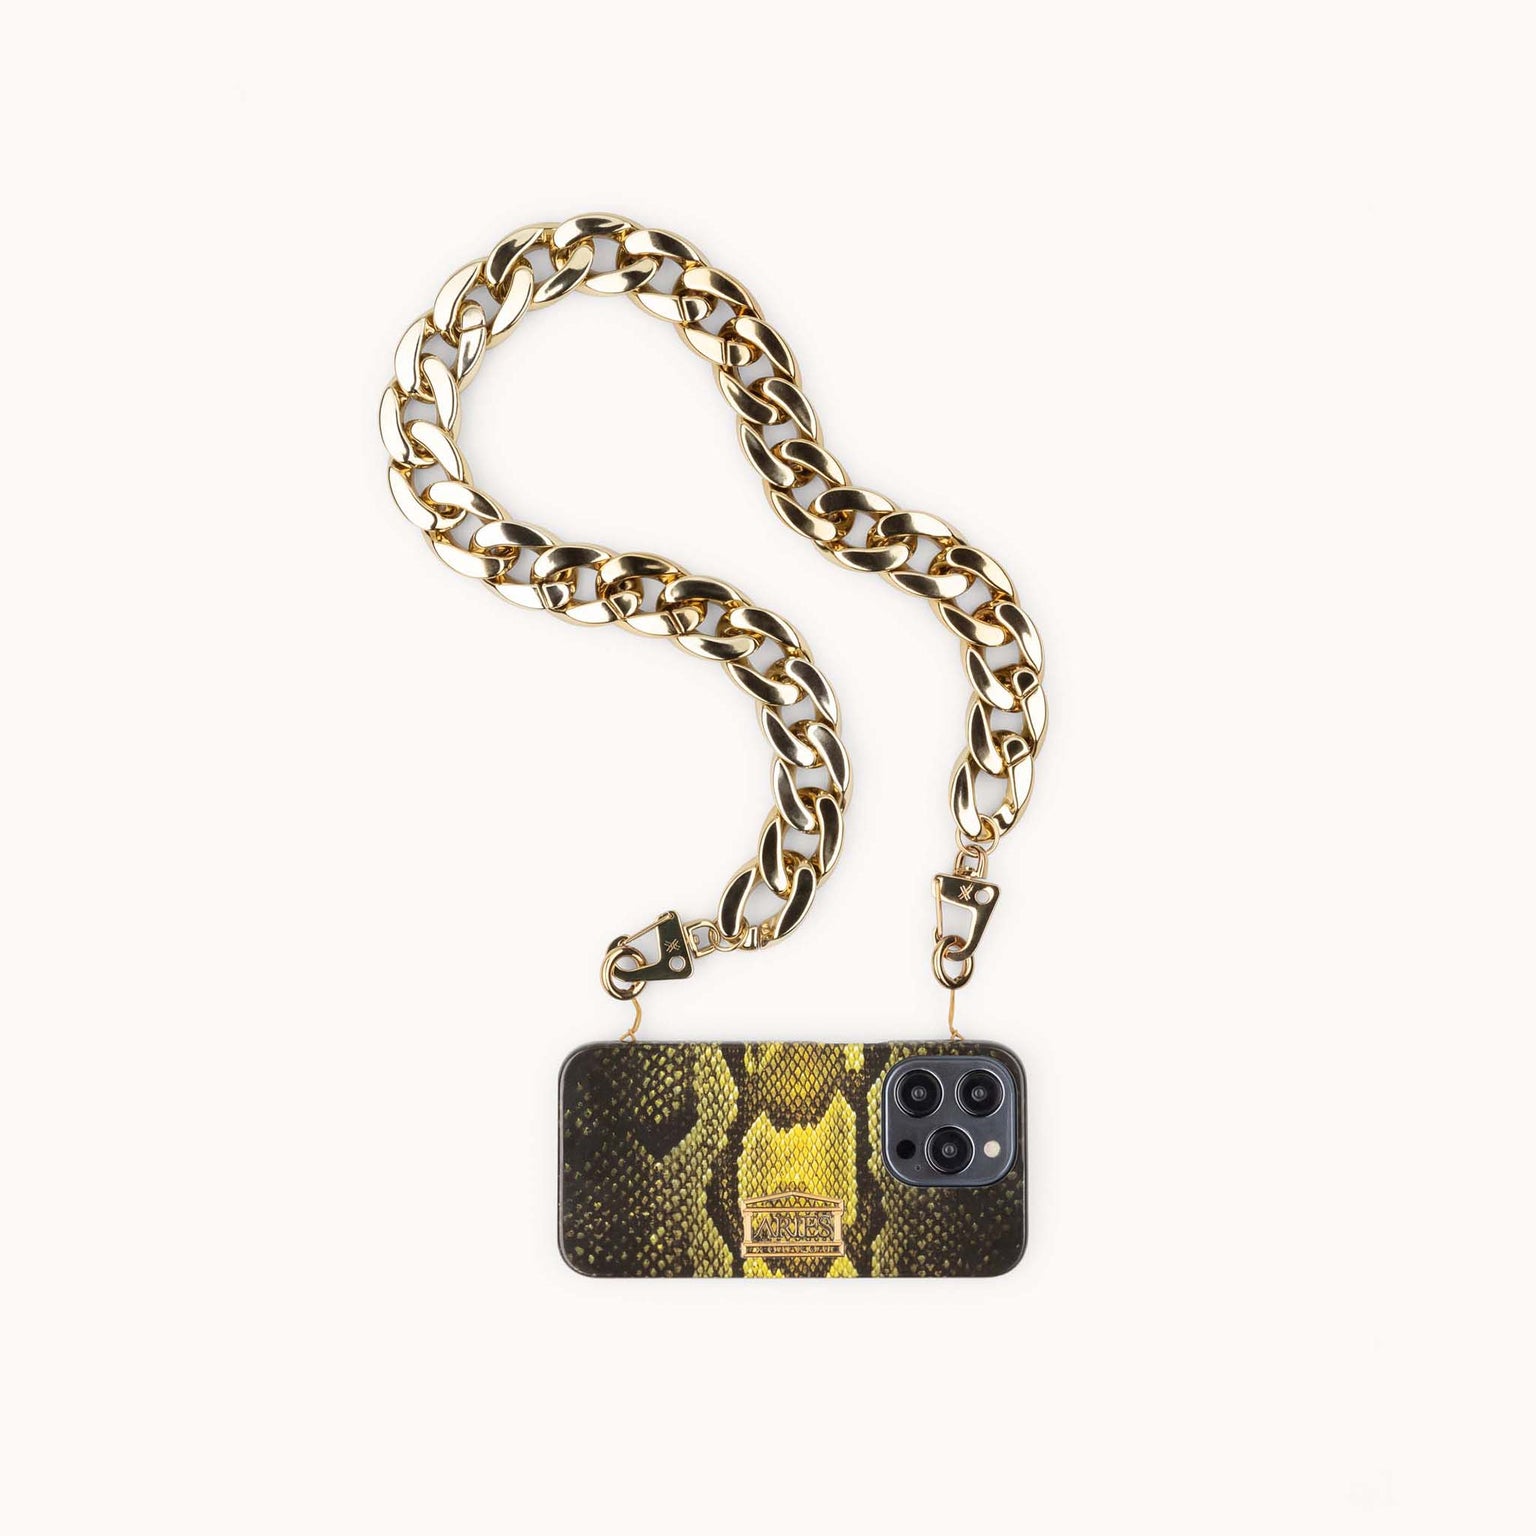 Aries x XOUXOU collab Phone Necklace with bold golden Chain and Case in Snake pattern Green